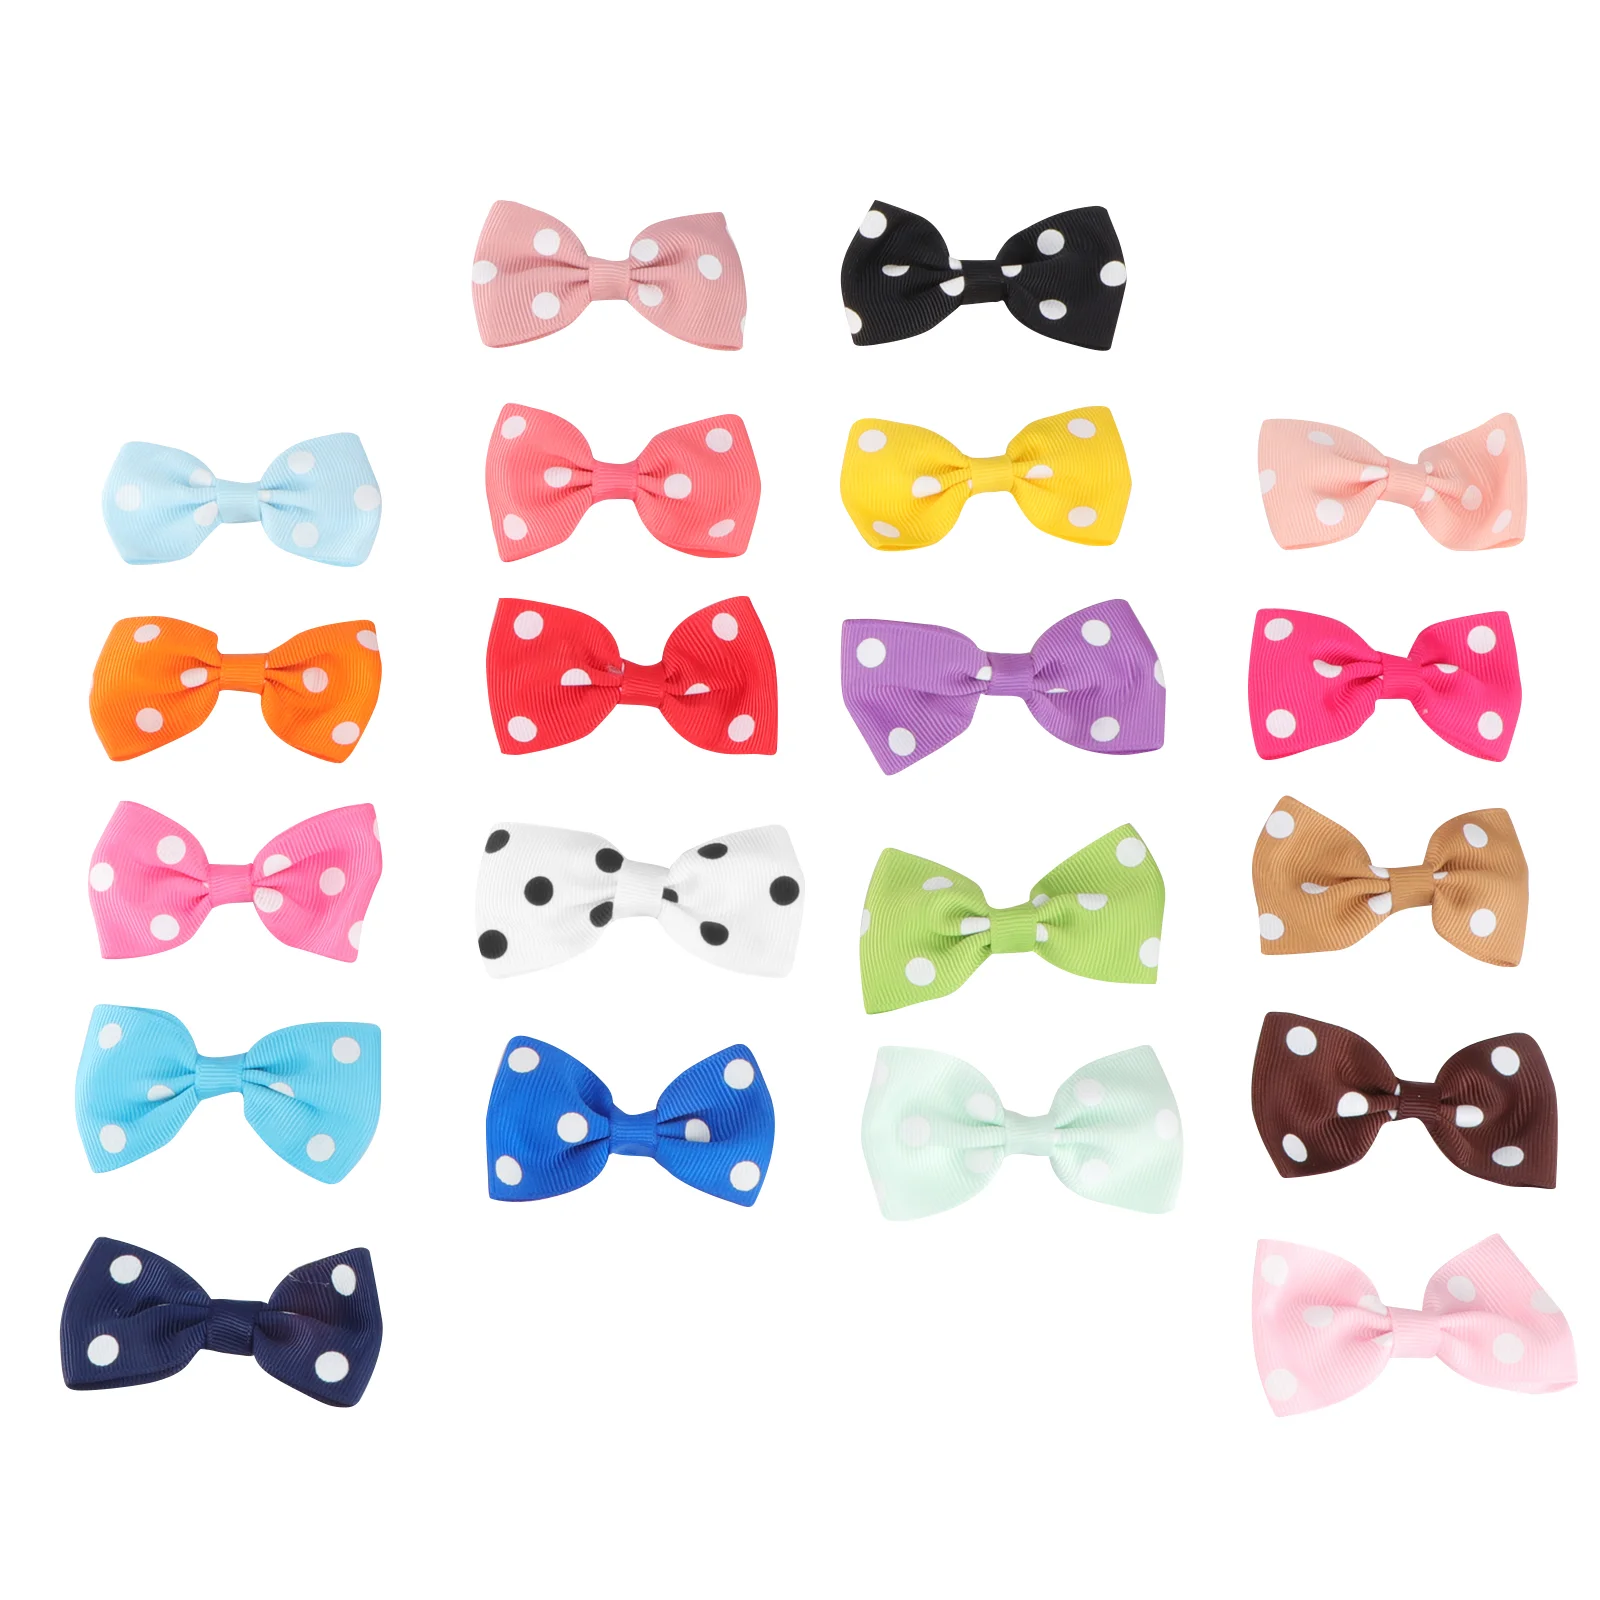 

20Pcs Bowknot Hair Bows with French Barrette Clips Dot Puppies Yorkie Grooming Hair Accessories for Kids Children